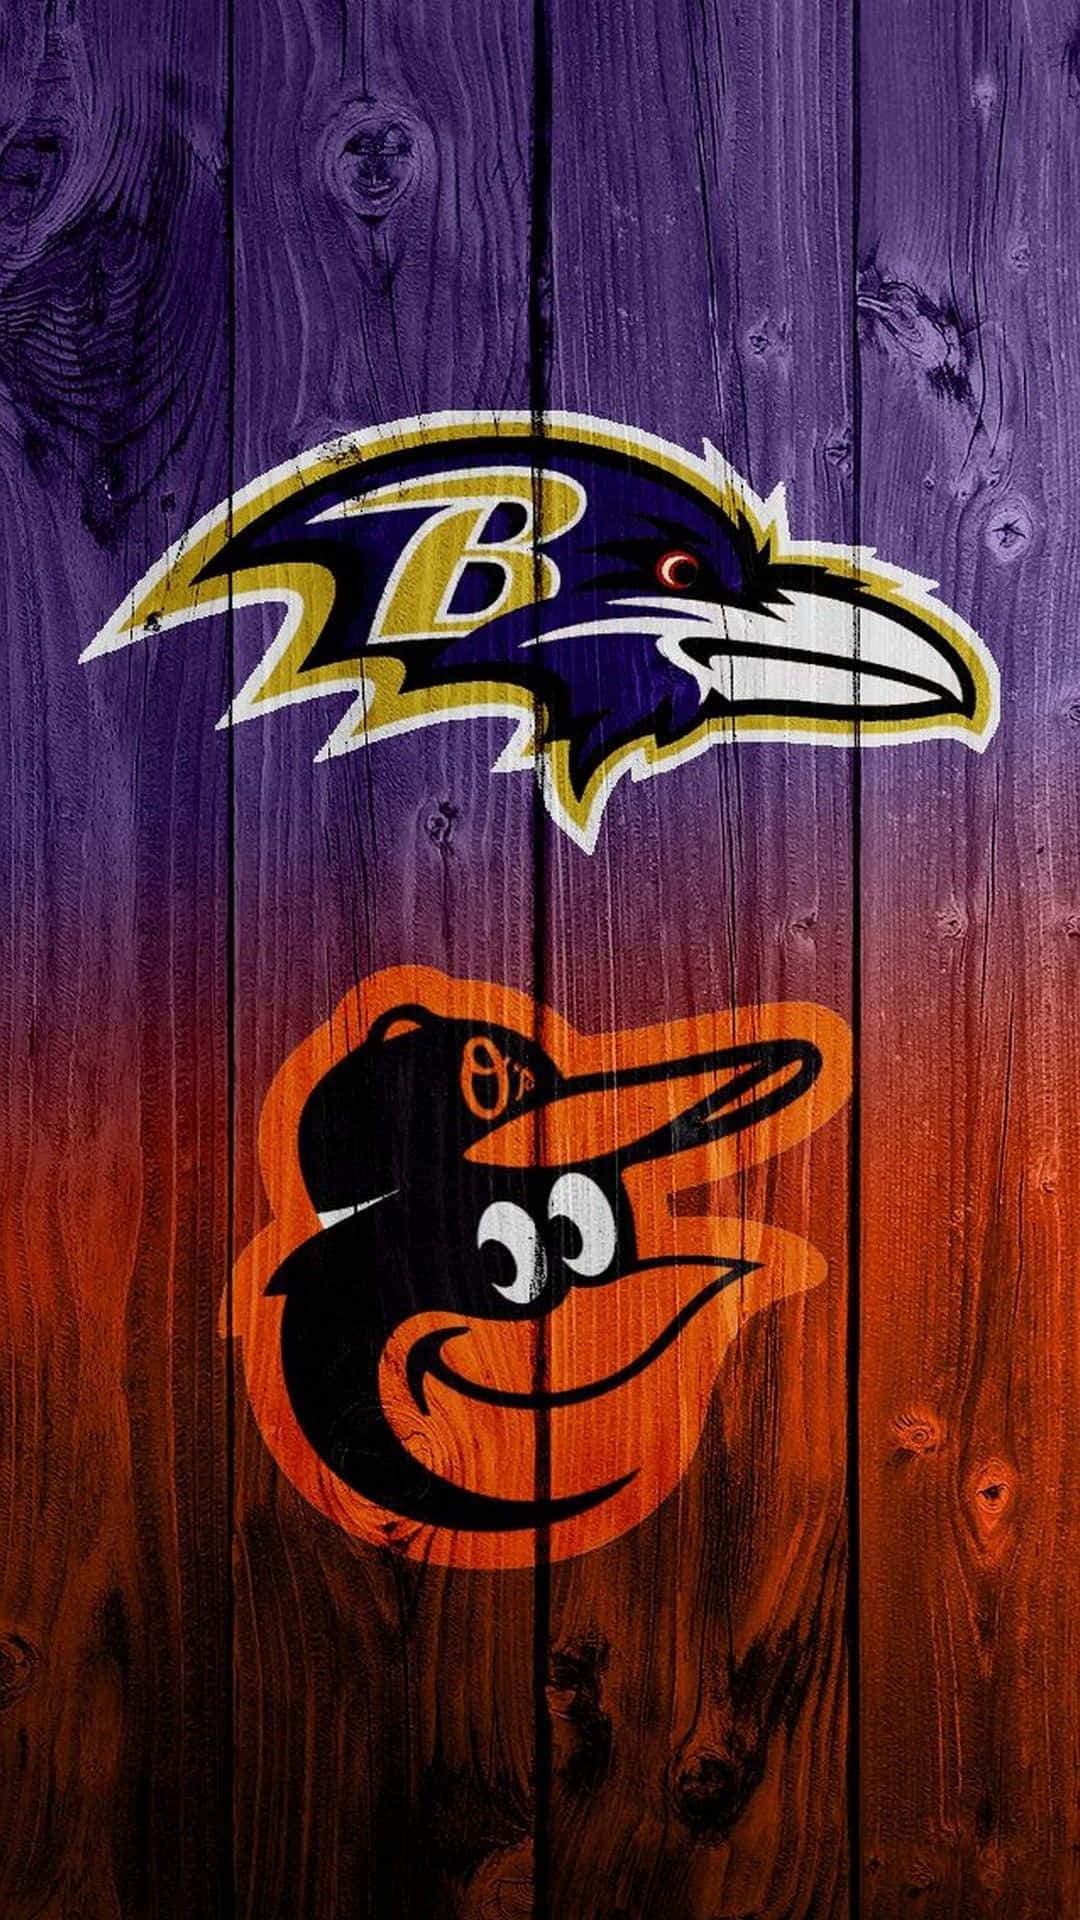 Supporting the Baltimore Ravens